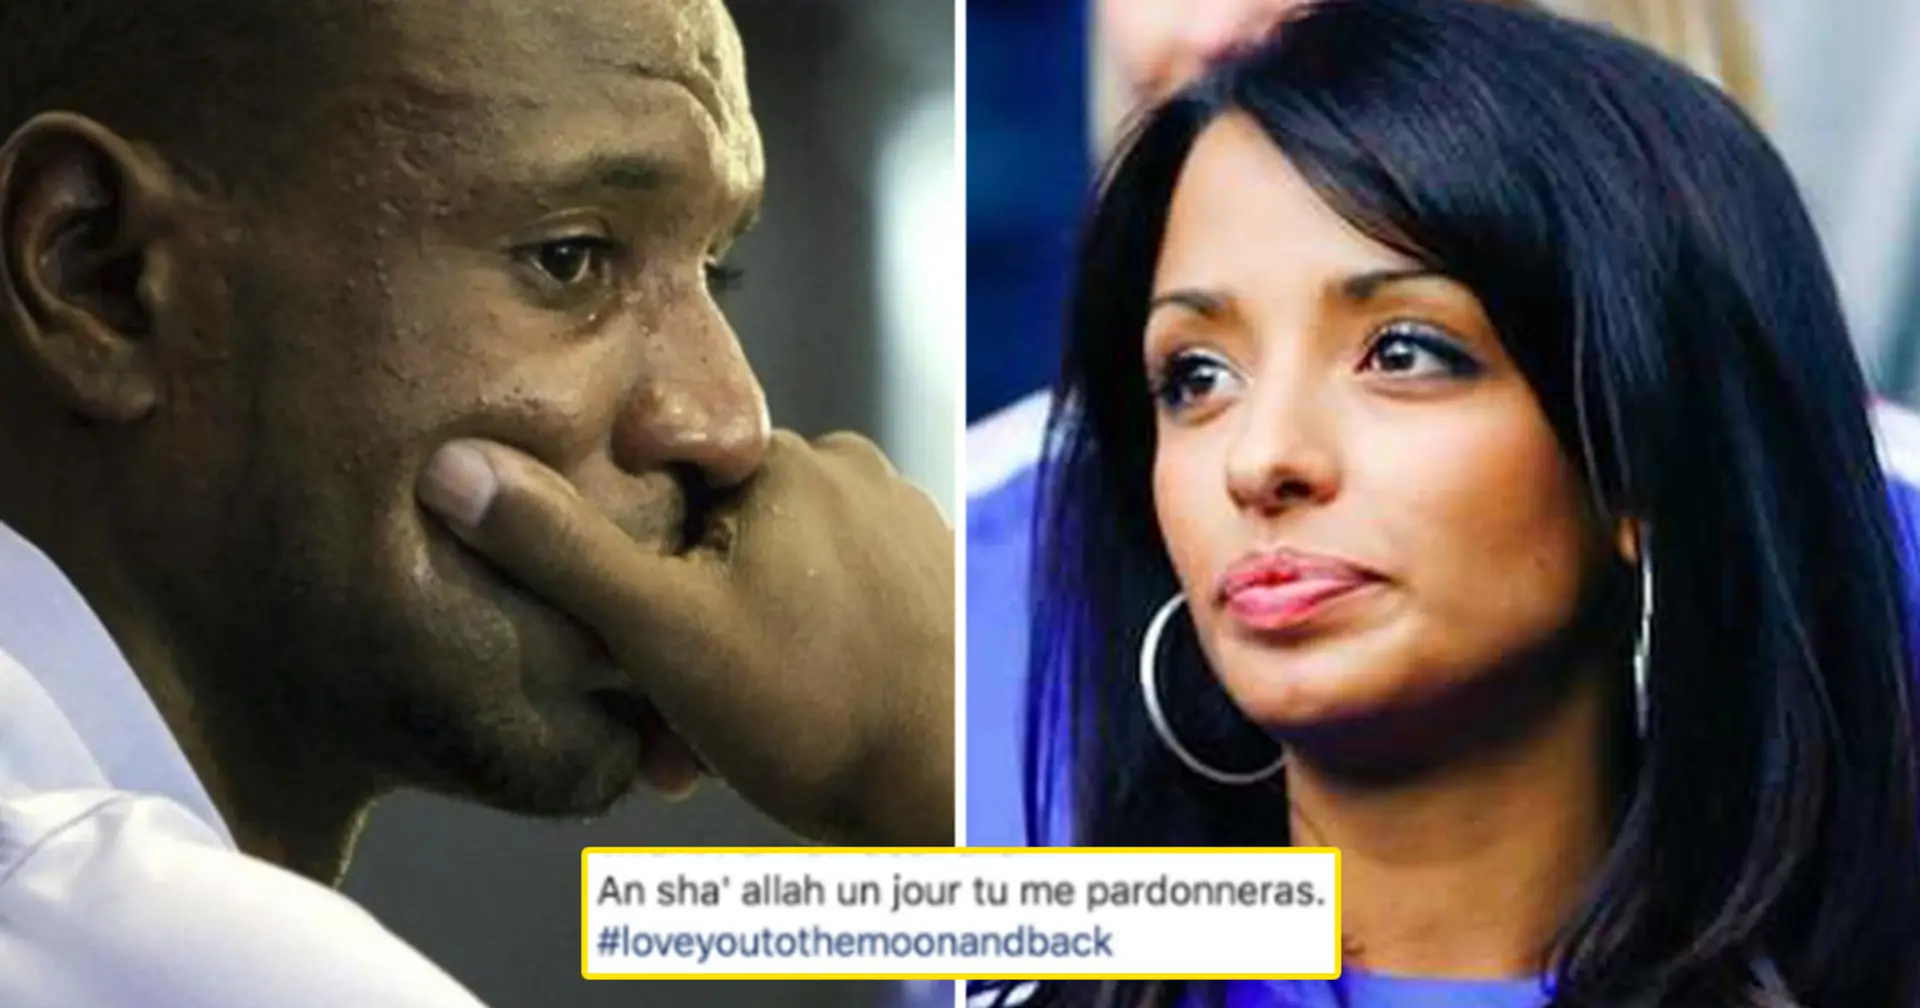 'I deserve this even if it kills me alive': Abidal sends message to his wife after confessing to cheating